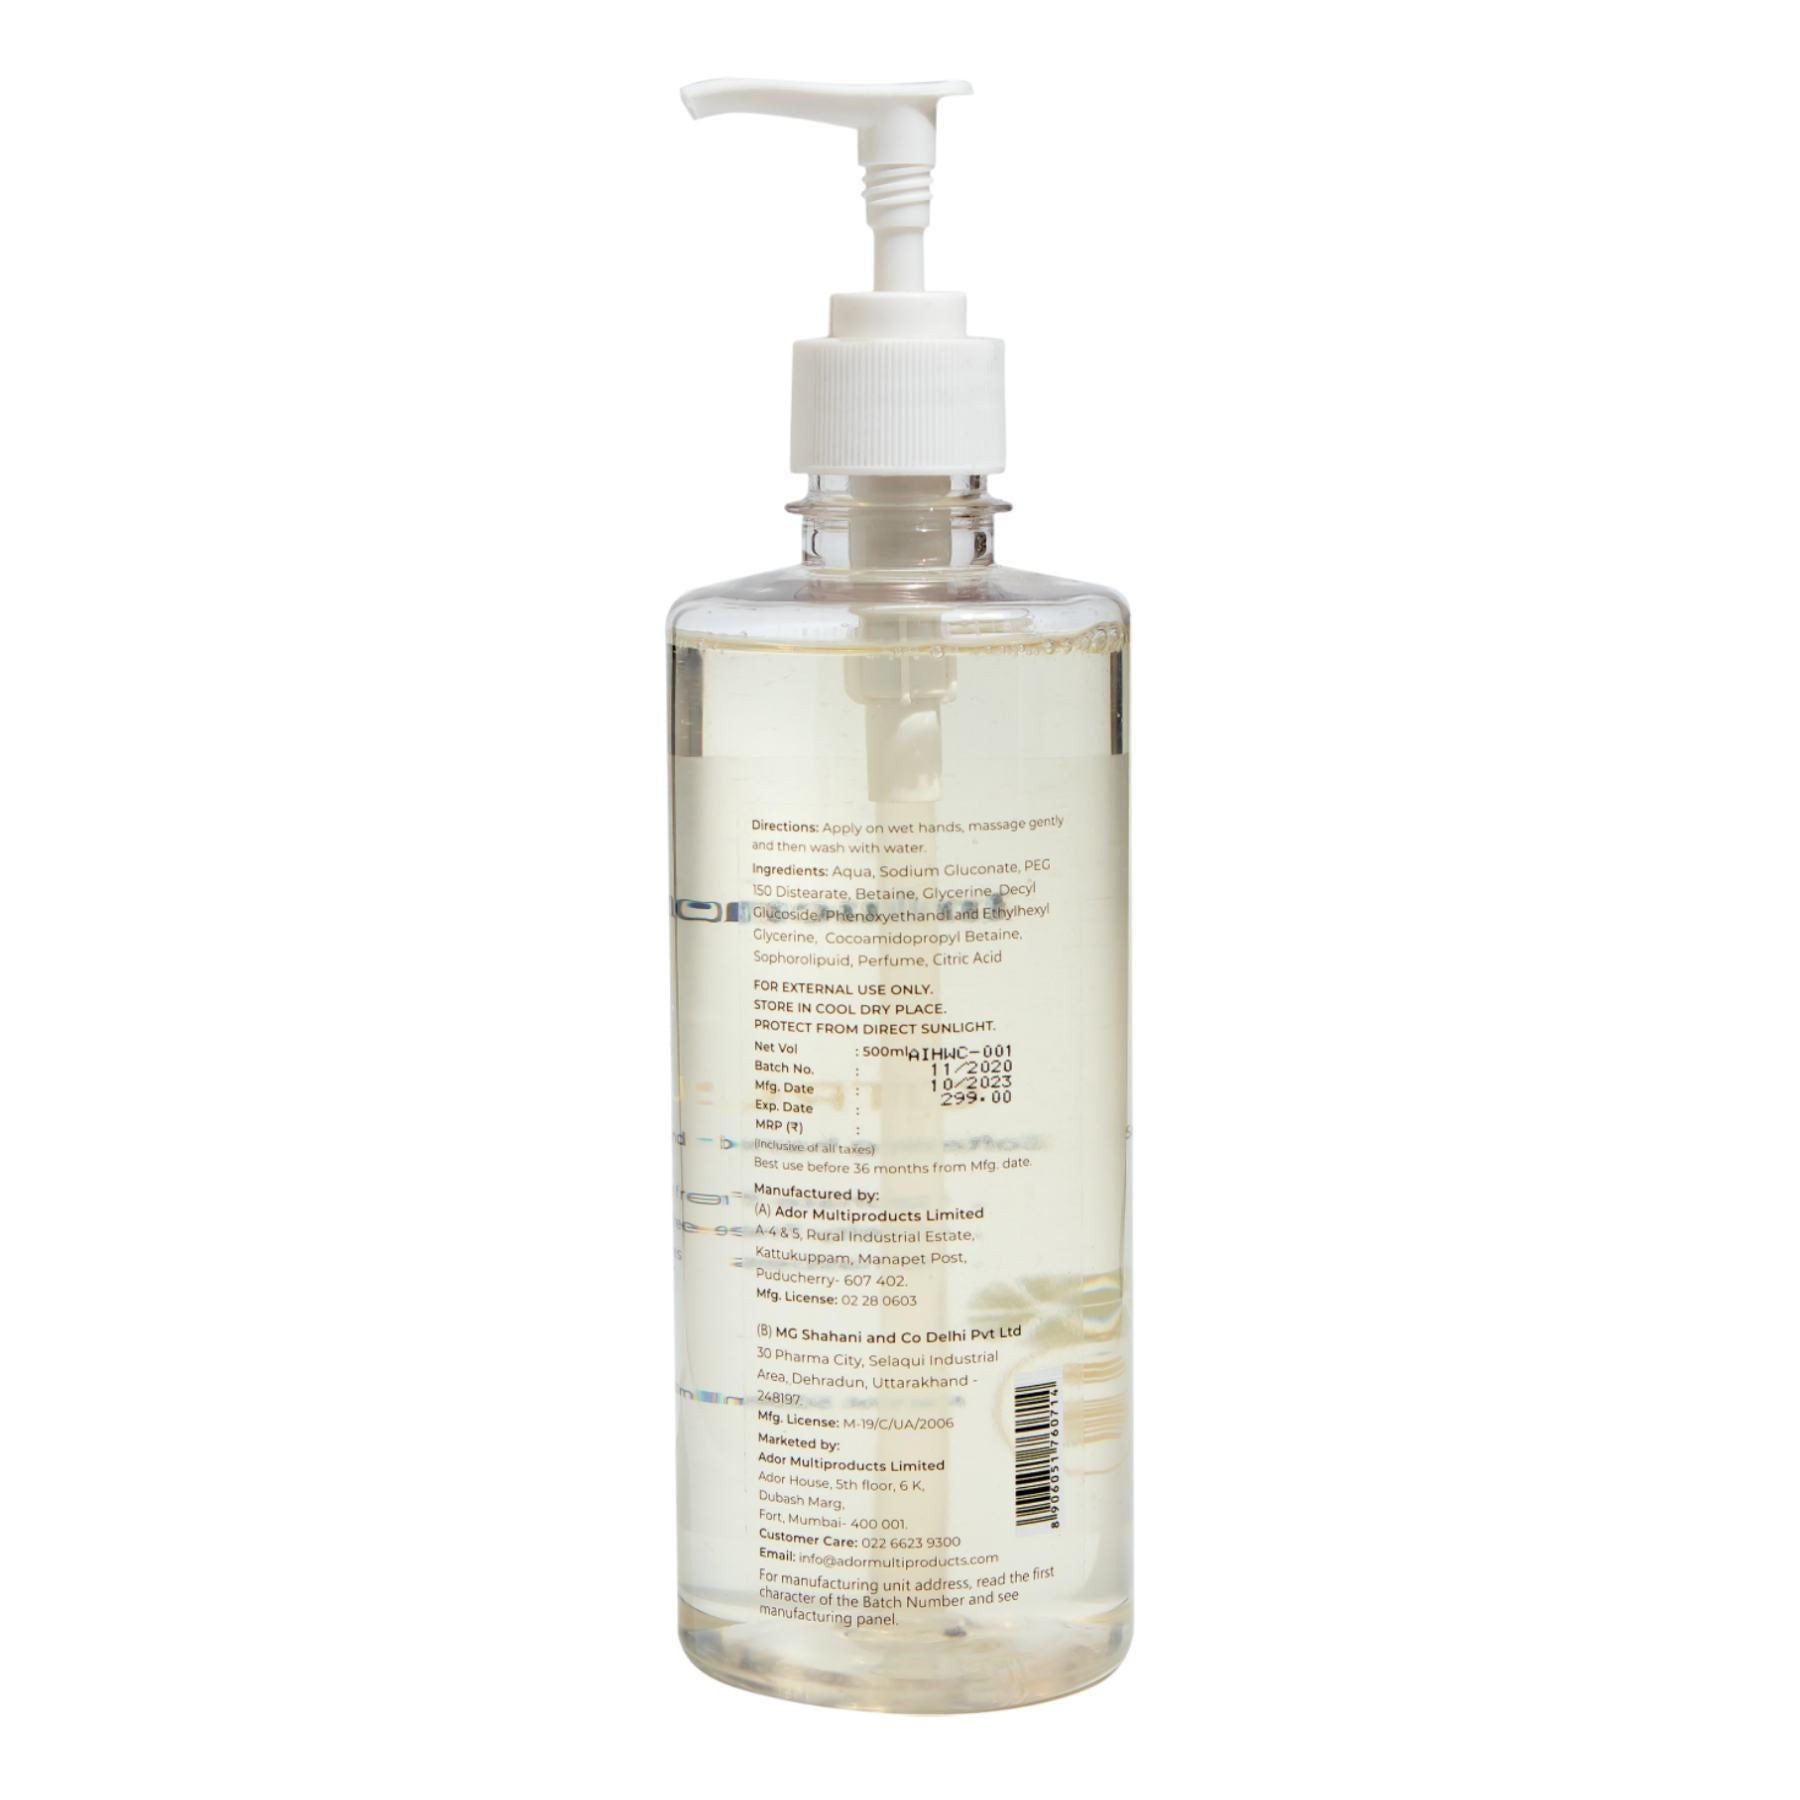 Shop Influence Citrus Hand Wash (500 ml) on Sublime Life. Kills Germs and Keeps your Hands Clean